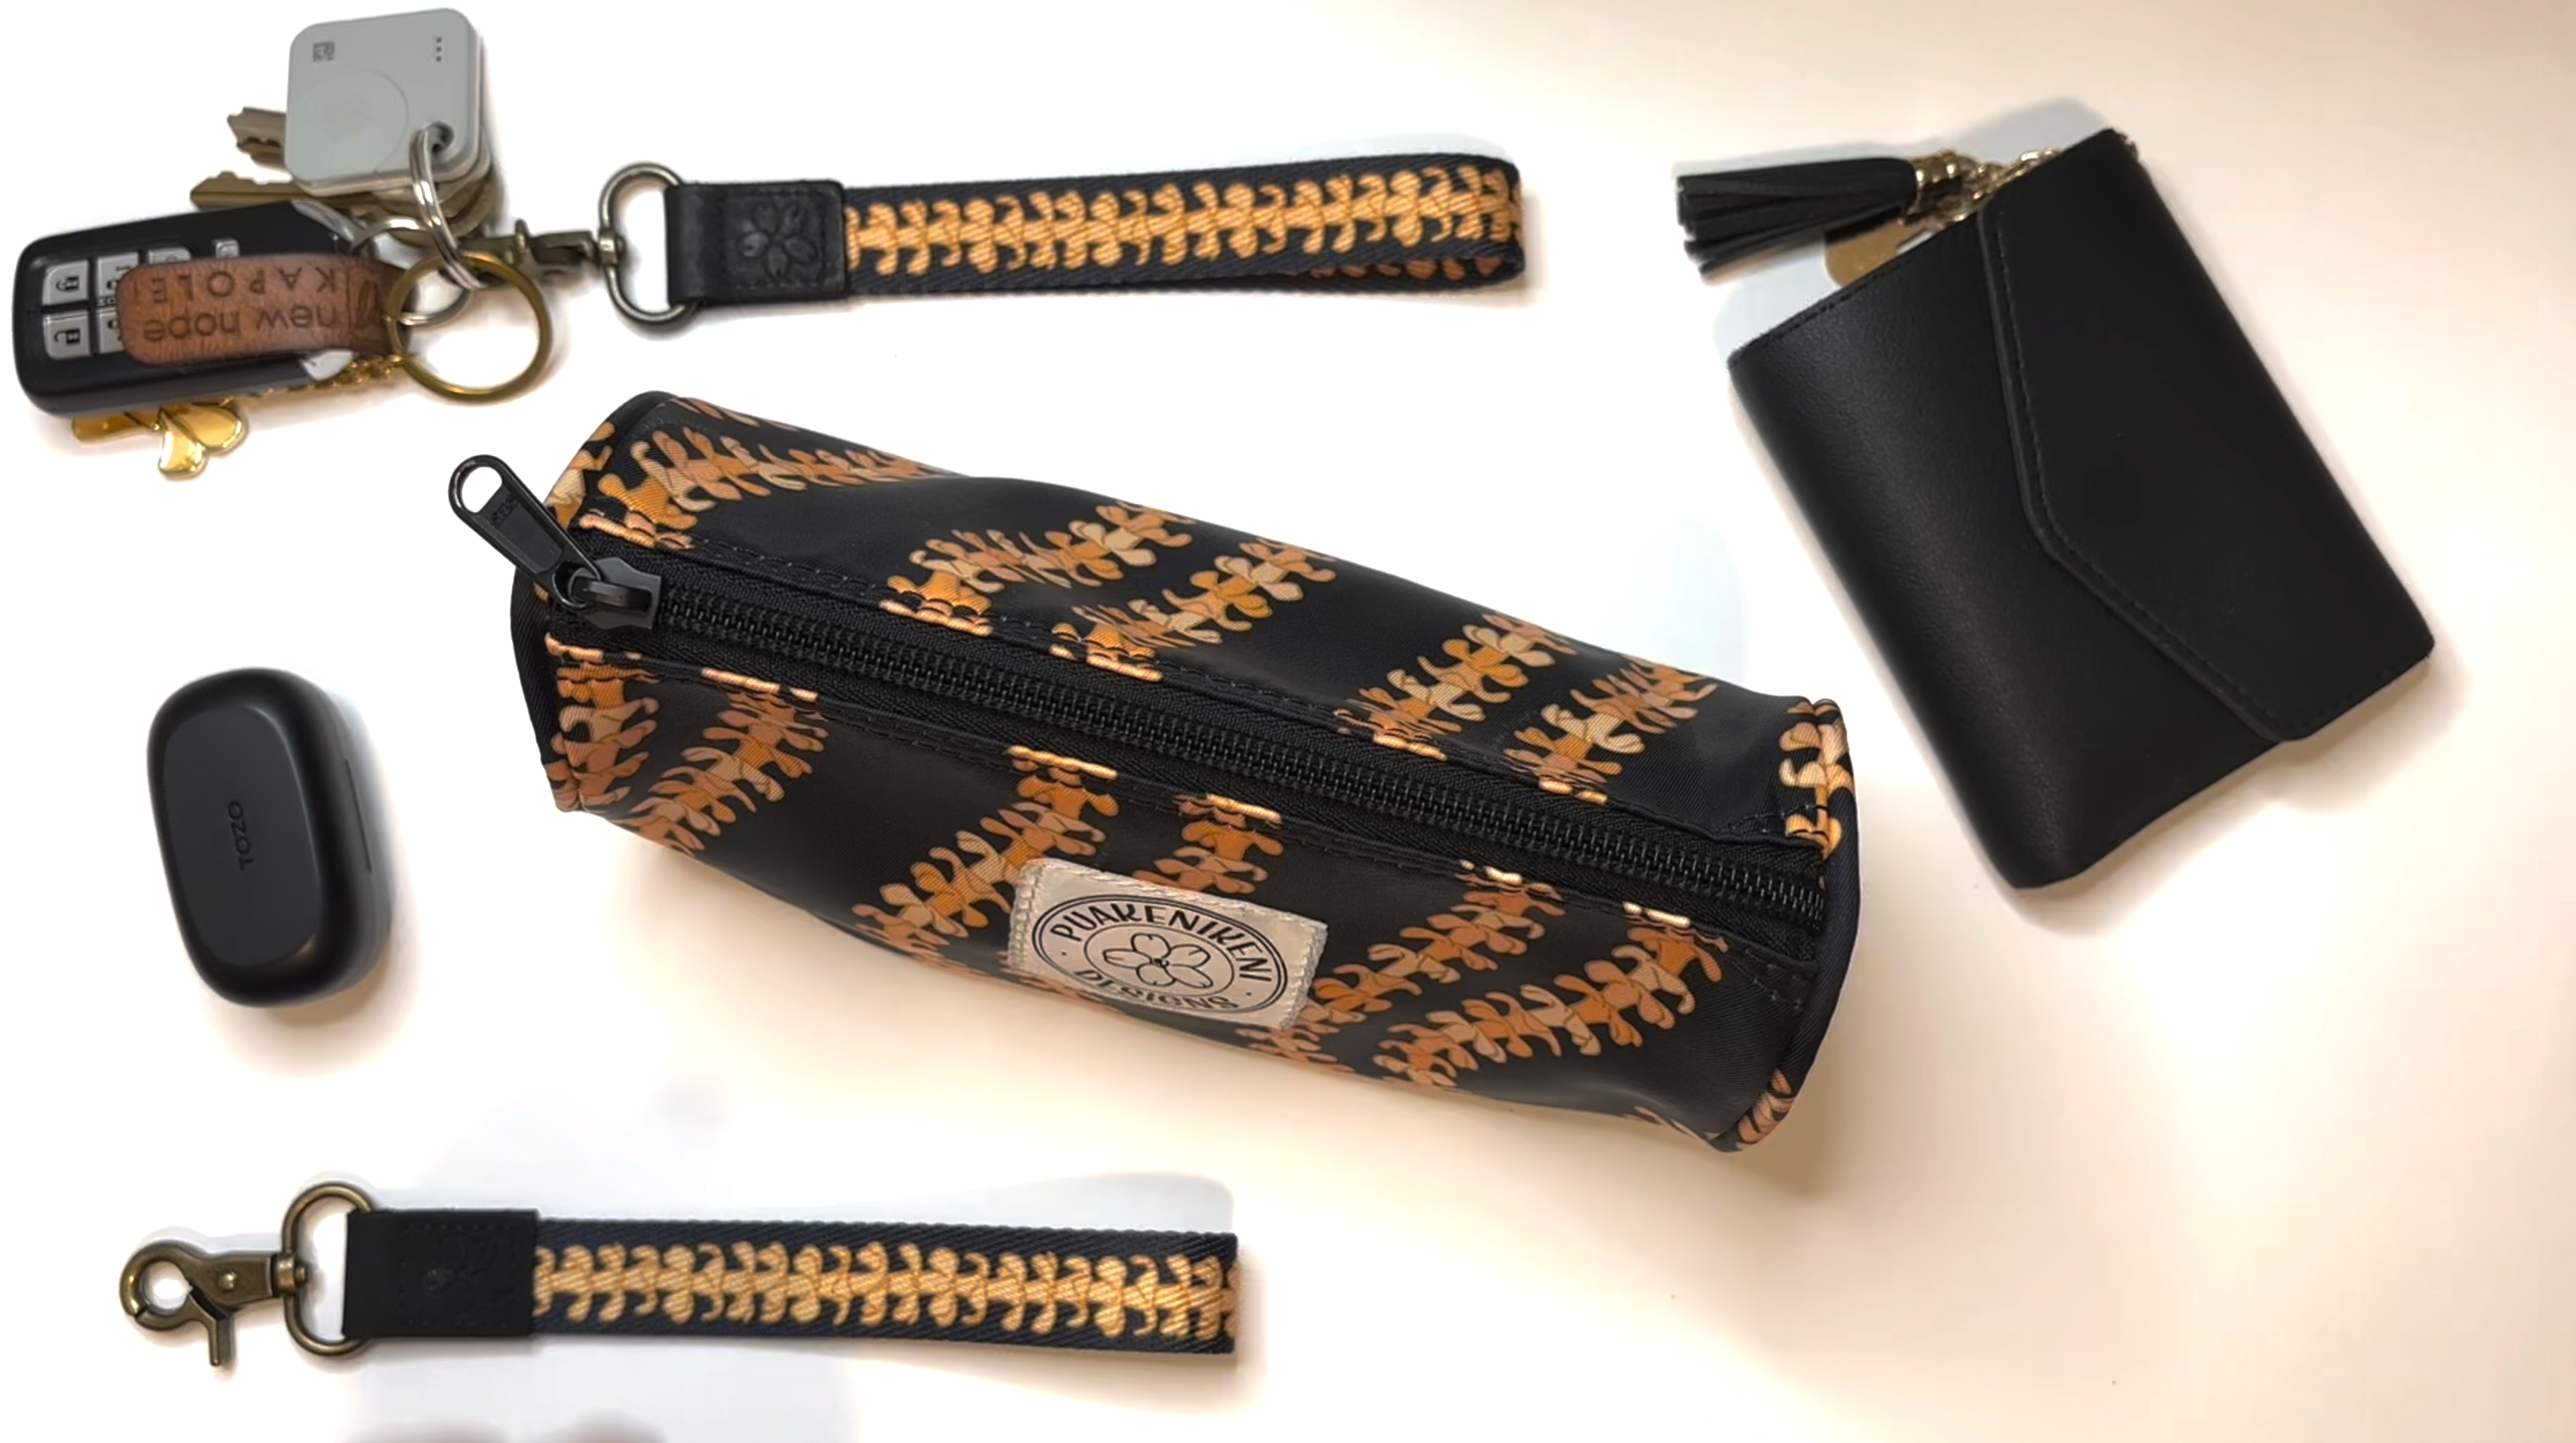 Load video: Grab-and-Go Set in Kaulua Black, a bundle including the Mini Zipper Pouch and Wristlet Keyfob making a clutch set